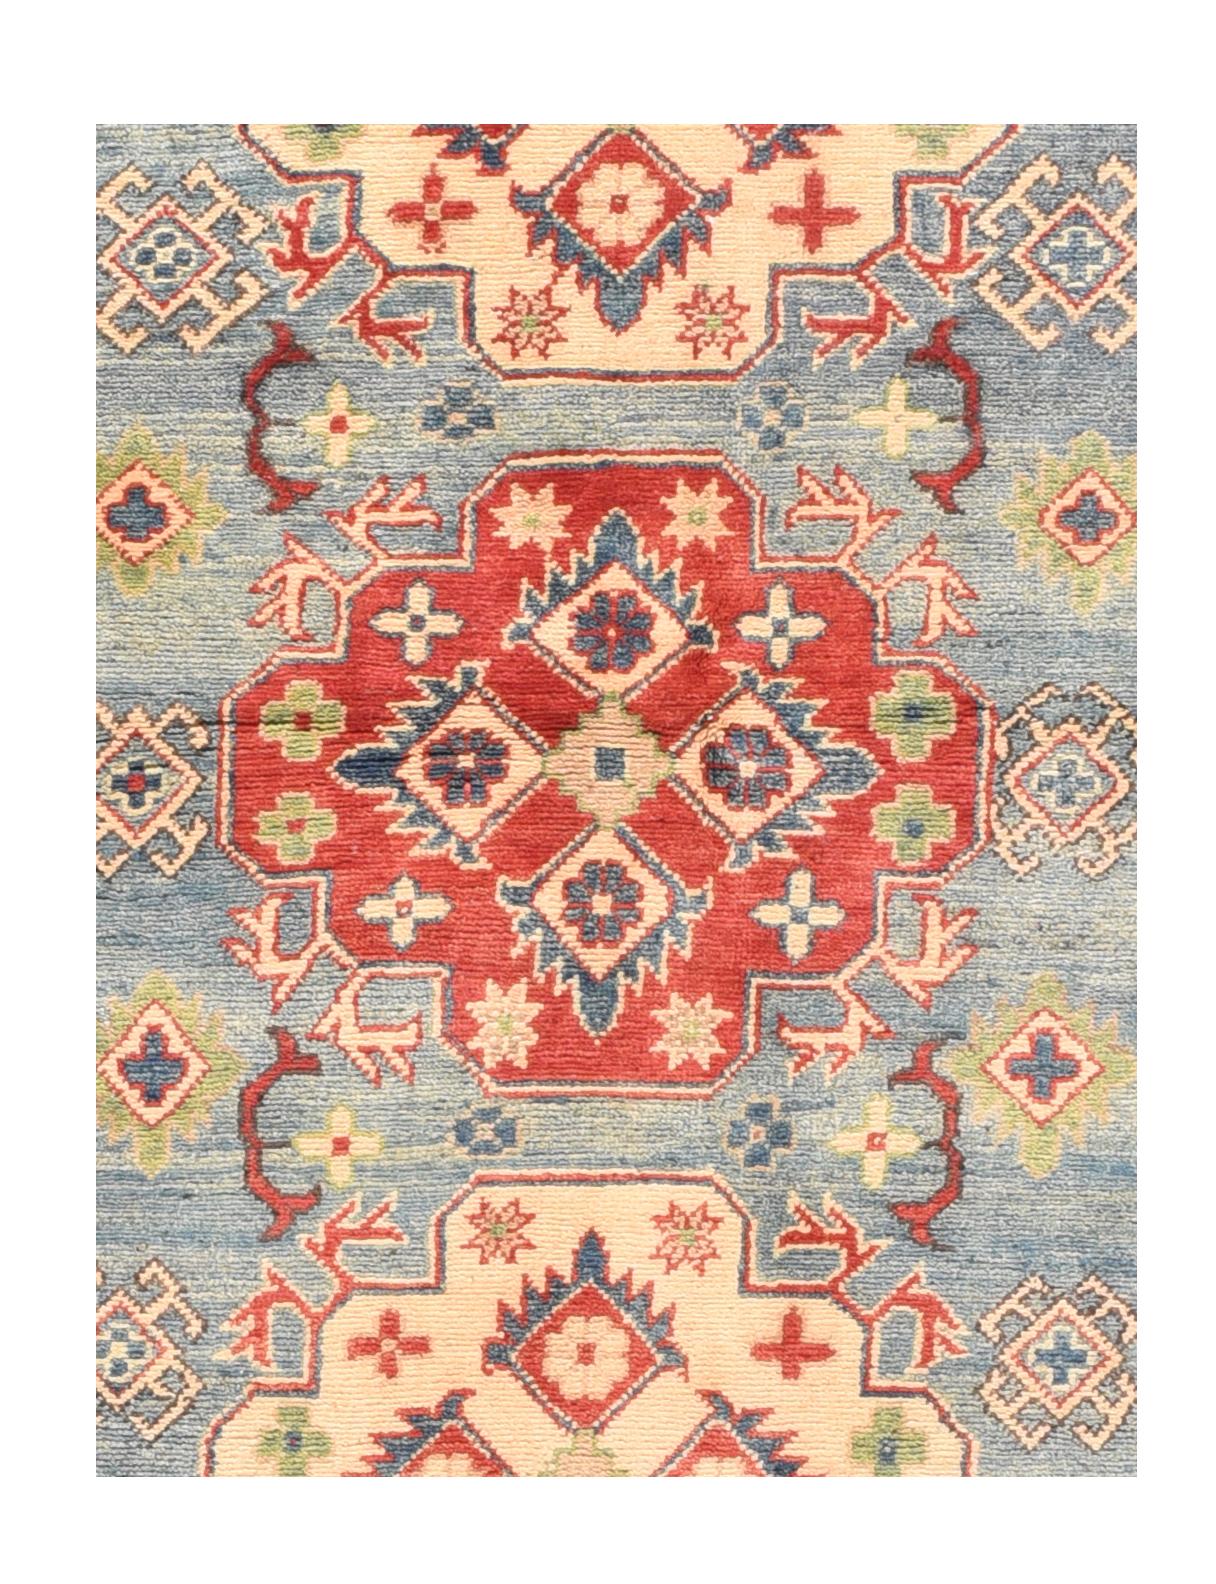 Kazak Rug 3'10'' x 5'10''
Design: Center Medallion

A Pakistani rug (Pak Persian rug or Pakistani carpet) is a type of handmade floor-covering textile traditionally made in Pakistan.

The manufacturing of carpets in Pakistan began in the same way as